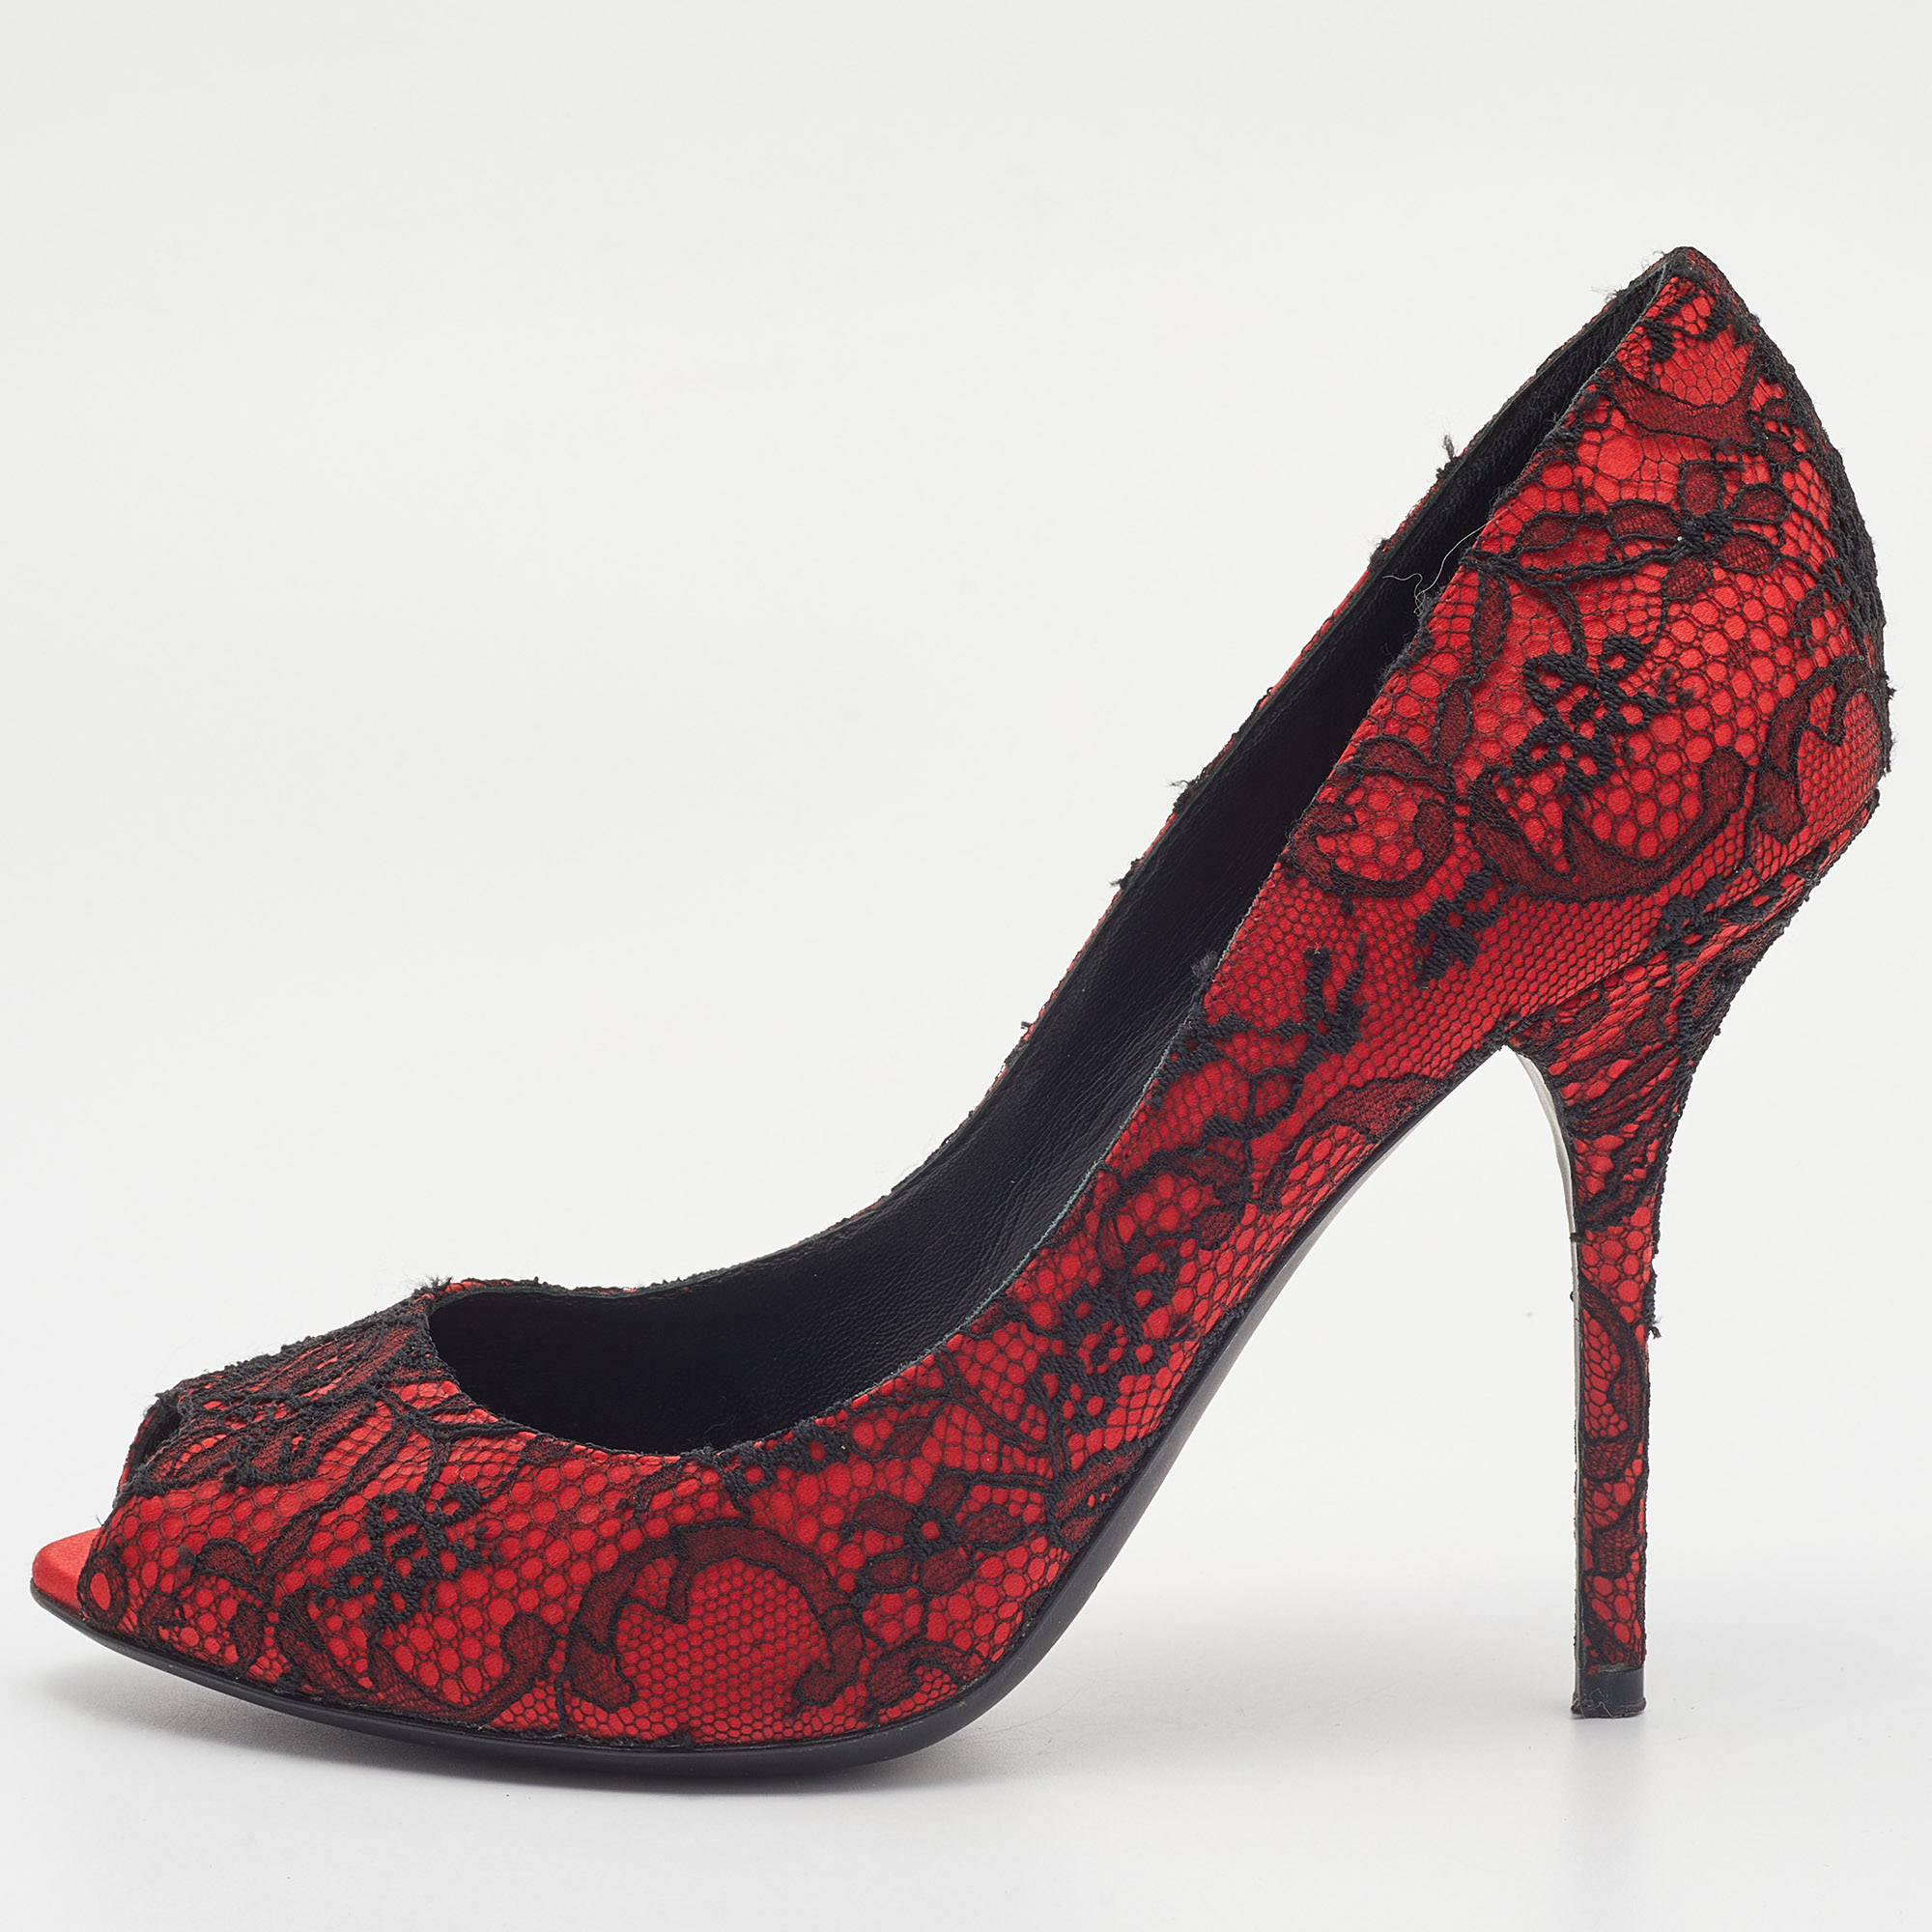 

Dolce & Gabbana Red/Black Satin and Lace Peep Toe Pumps Size